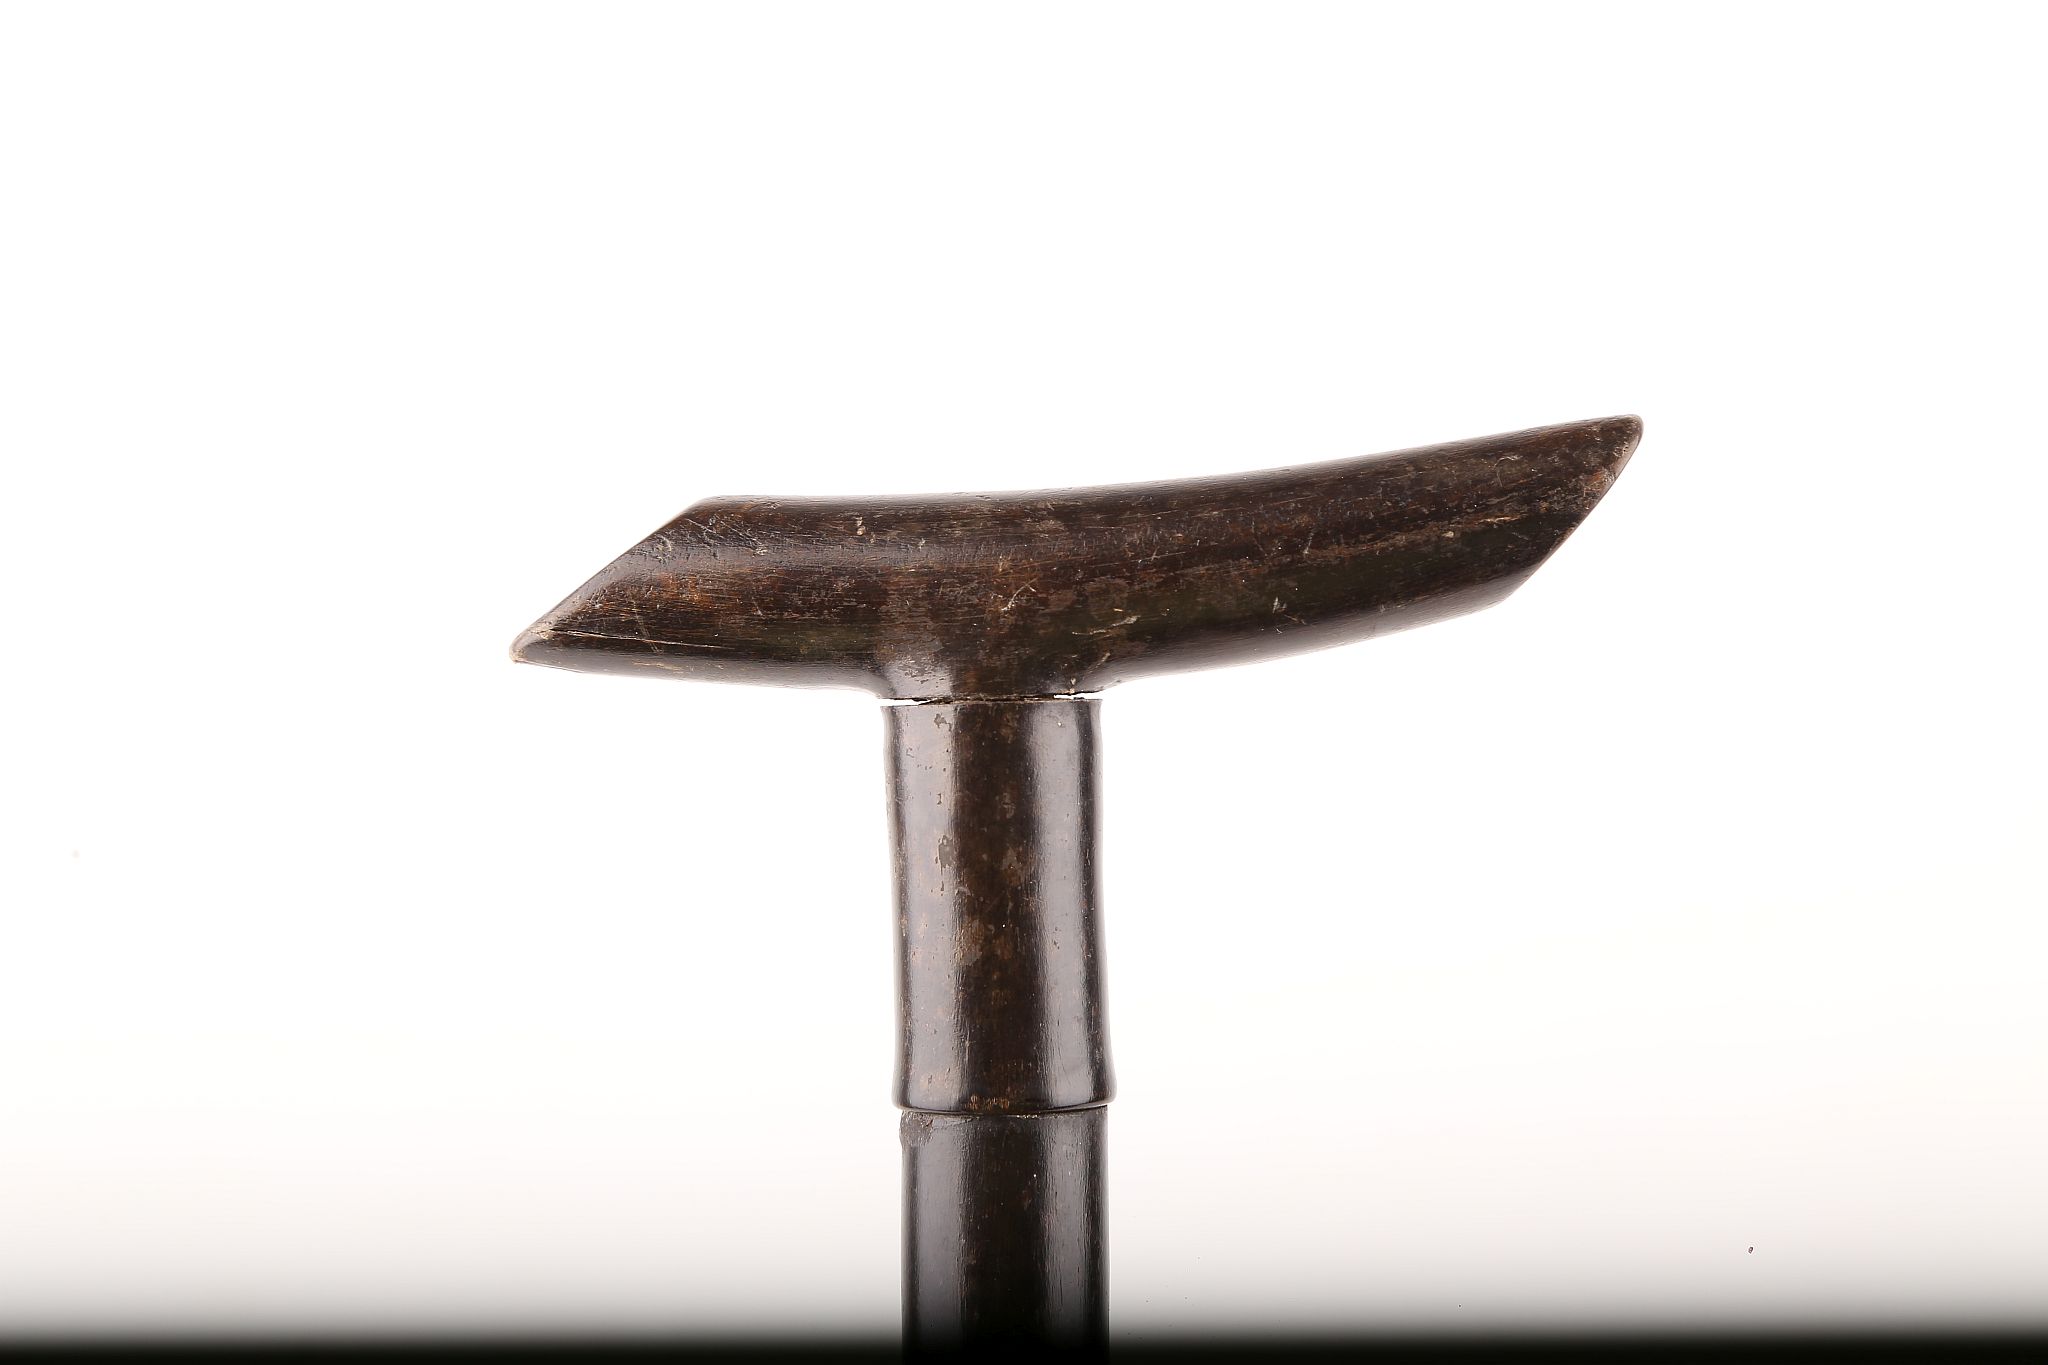 A HORN SECTIONAL TAU SHAPED HANDLED CANE, 85cm. - Image 3 of 6